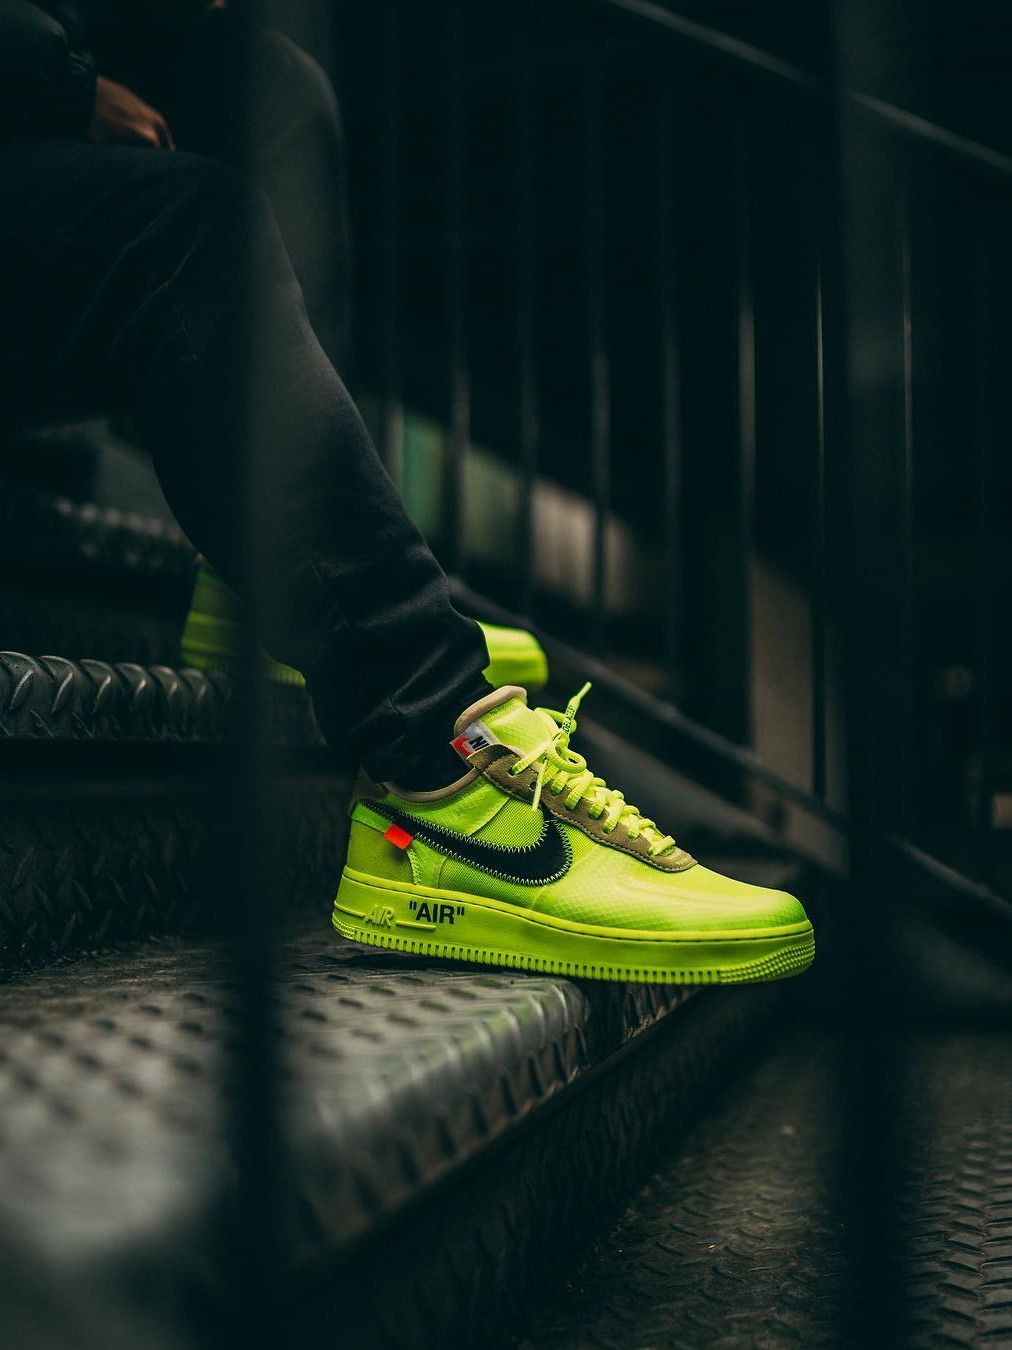 Off White Nike Air Force 1 Wallpapers